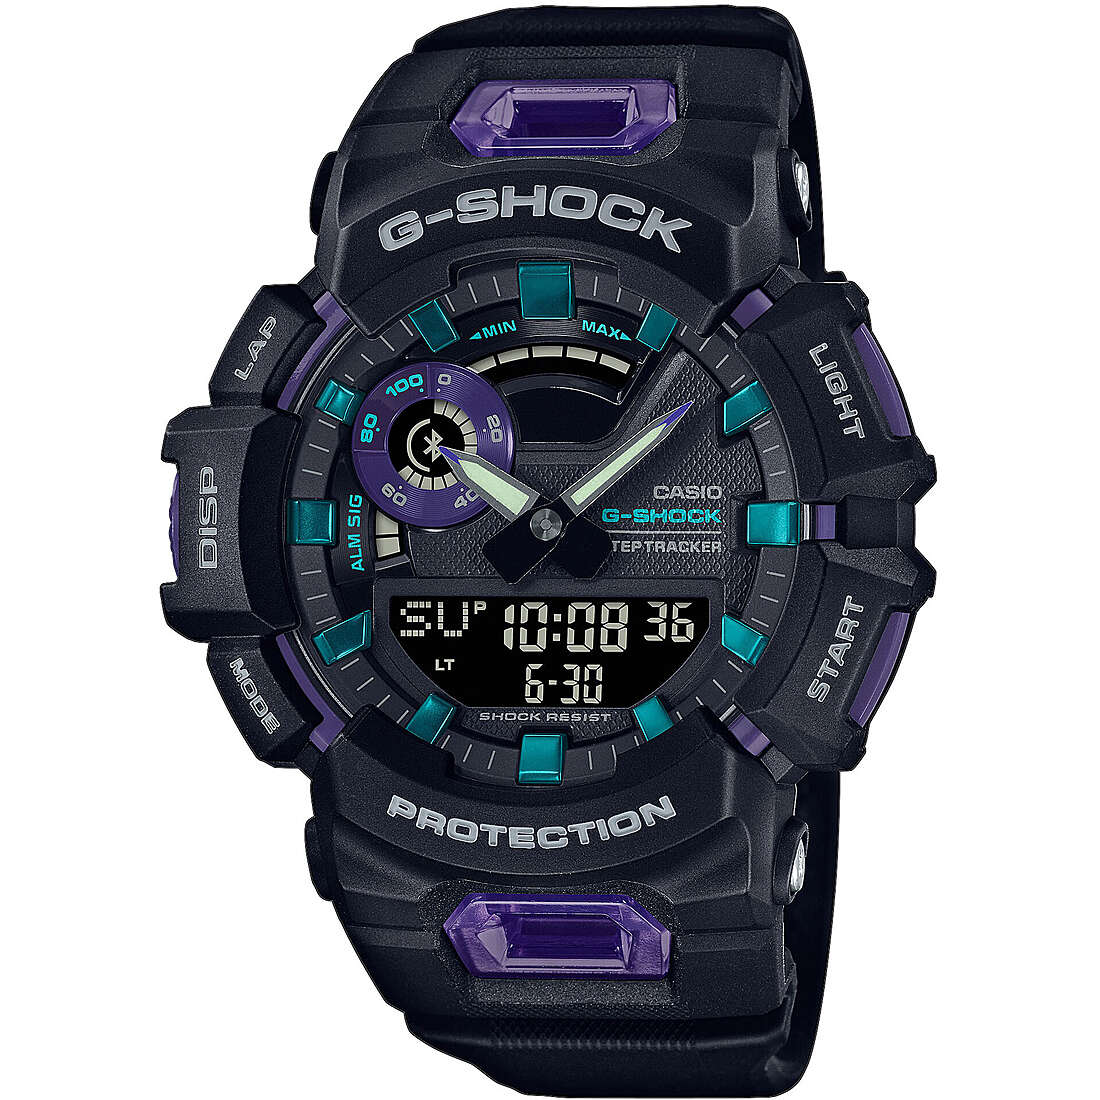 montre Smartwatch homme G-Shock G-Squad GBA-900-1A6ER